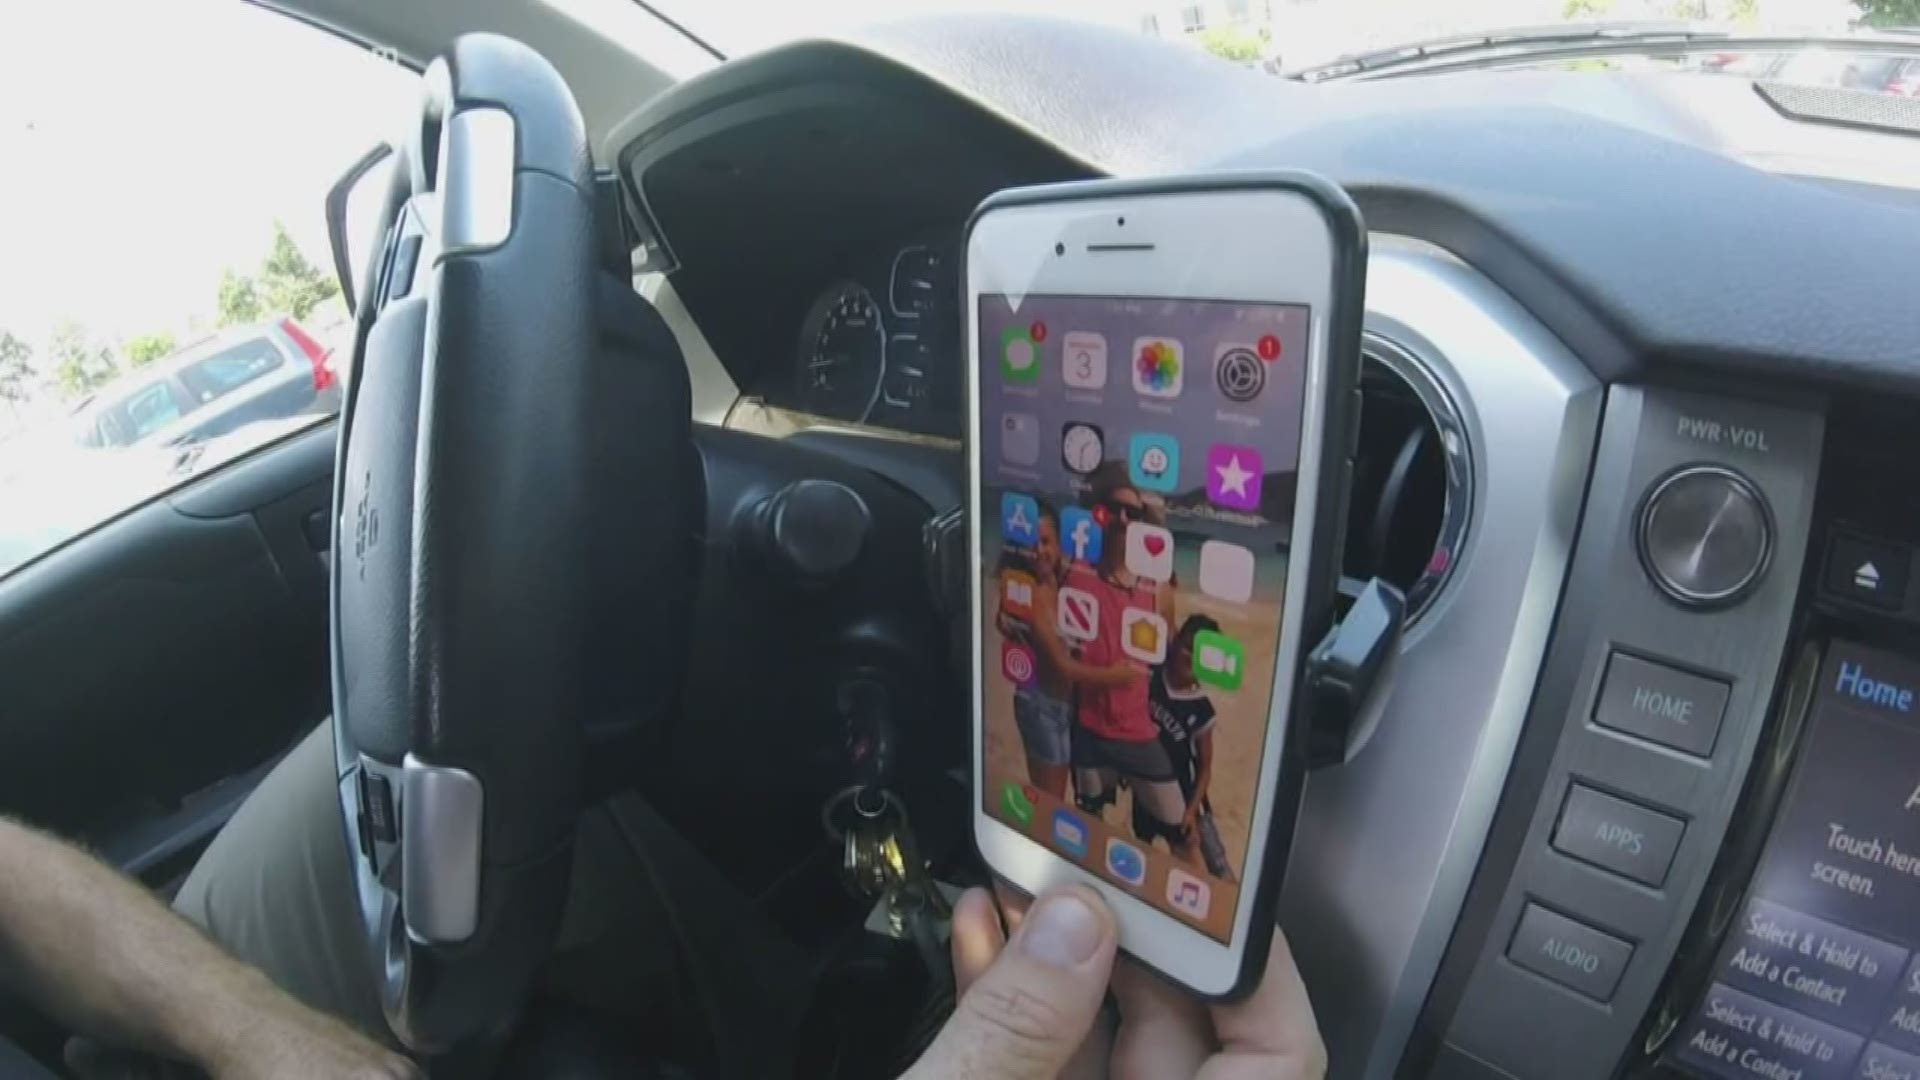 Maine's "hands-free" law goes into effect on Thursday.